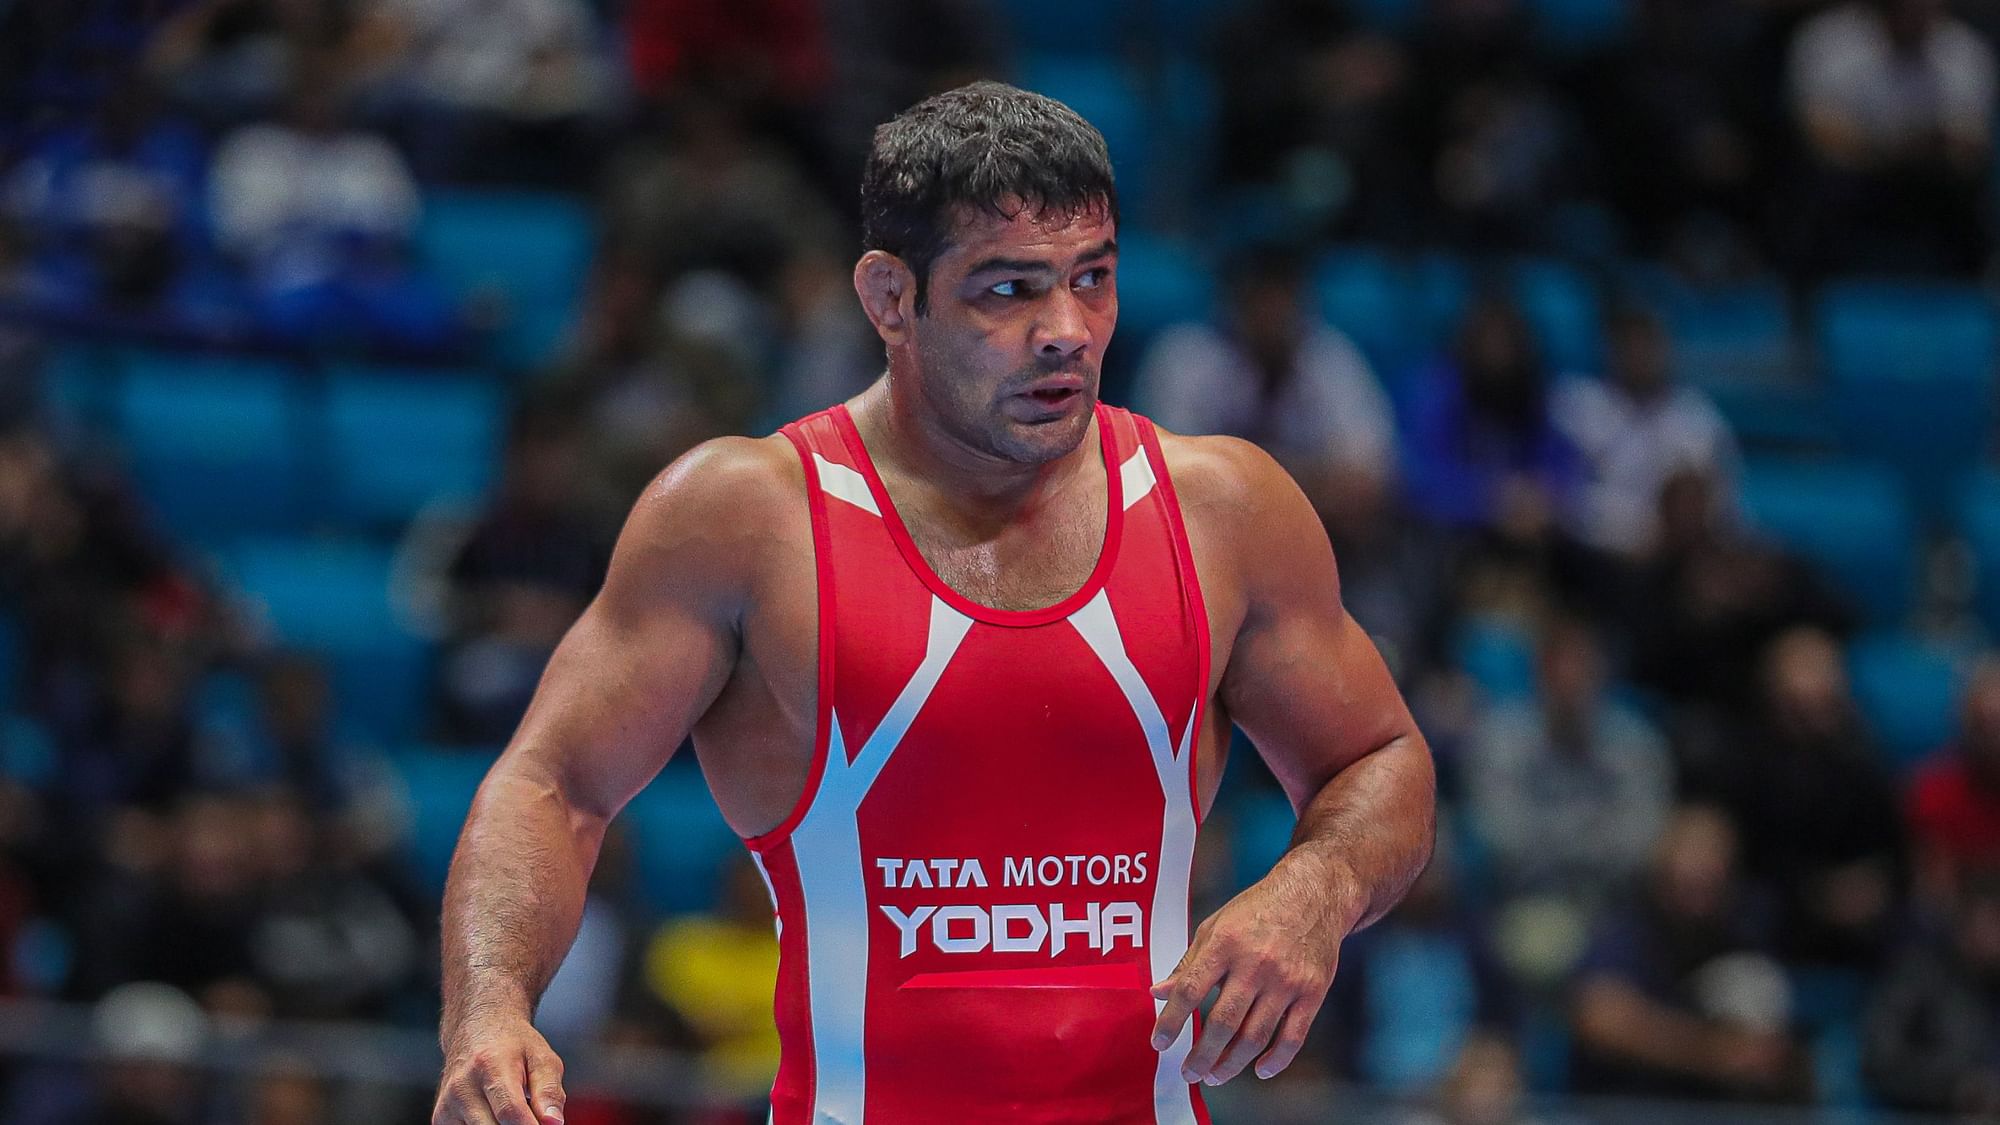 Jitender Kumar’s rivalry with Sushil Kumar has gone down as one of the most fiercest in the Indian sporting scene of late.